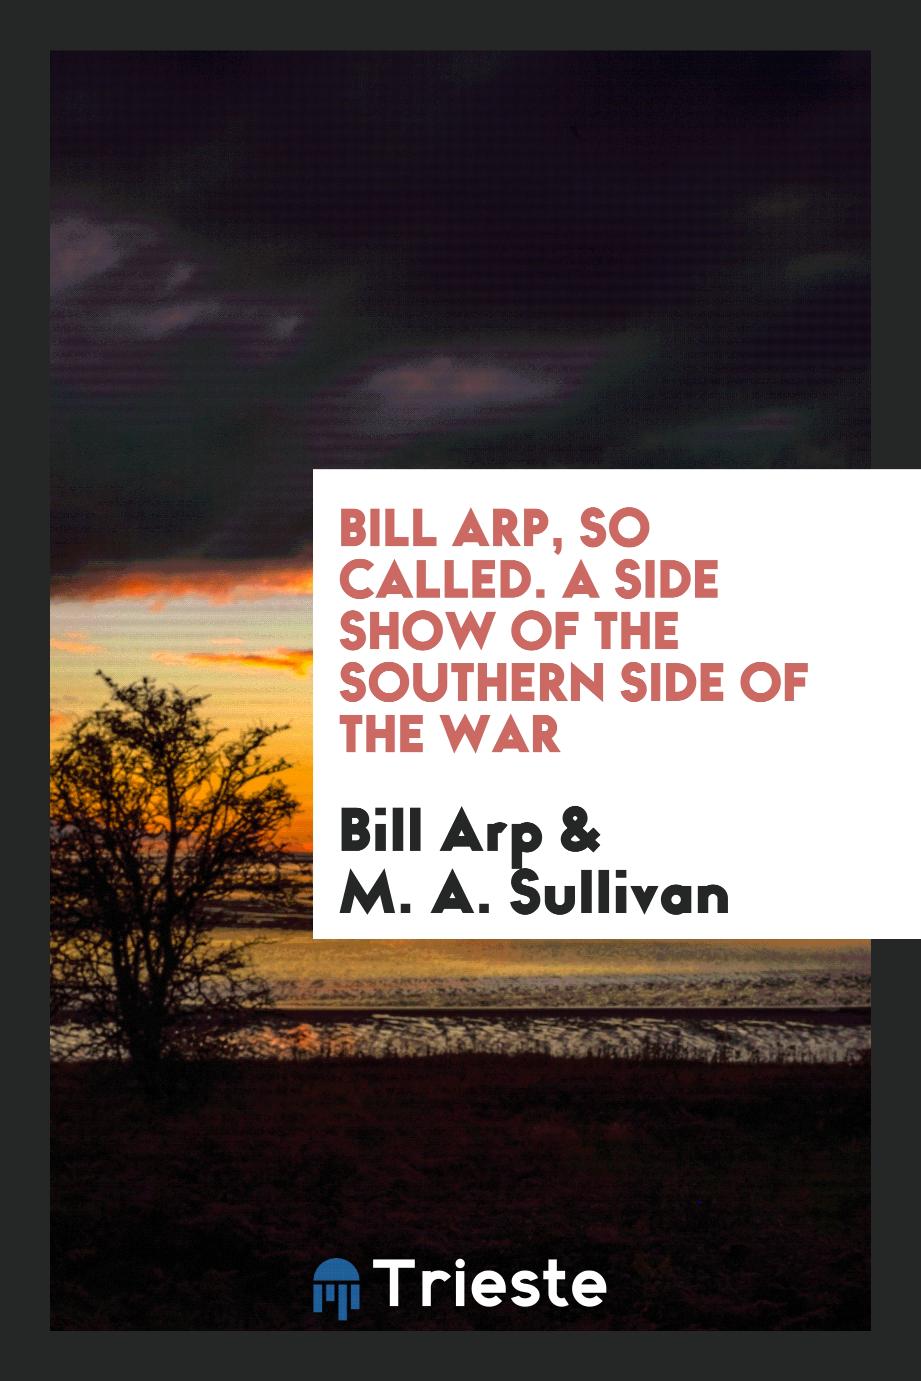 Bill Arp, so called. A side show of the southern side of the war